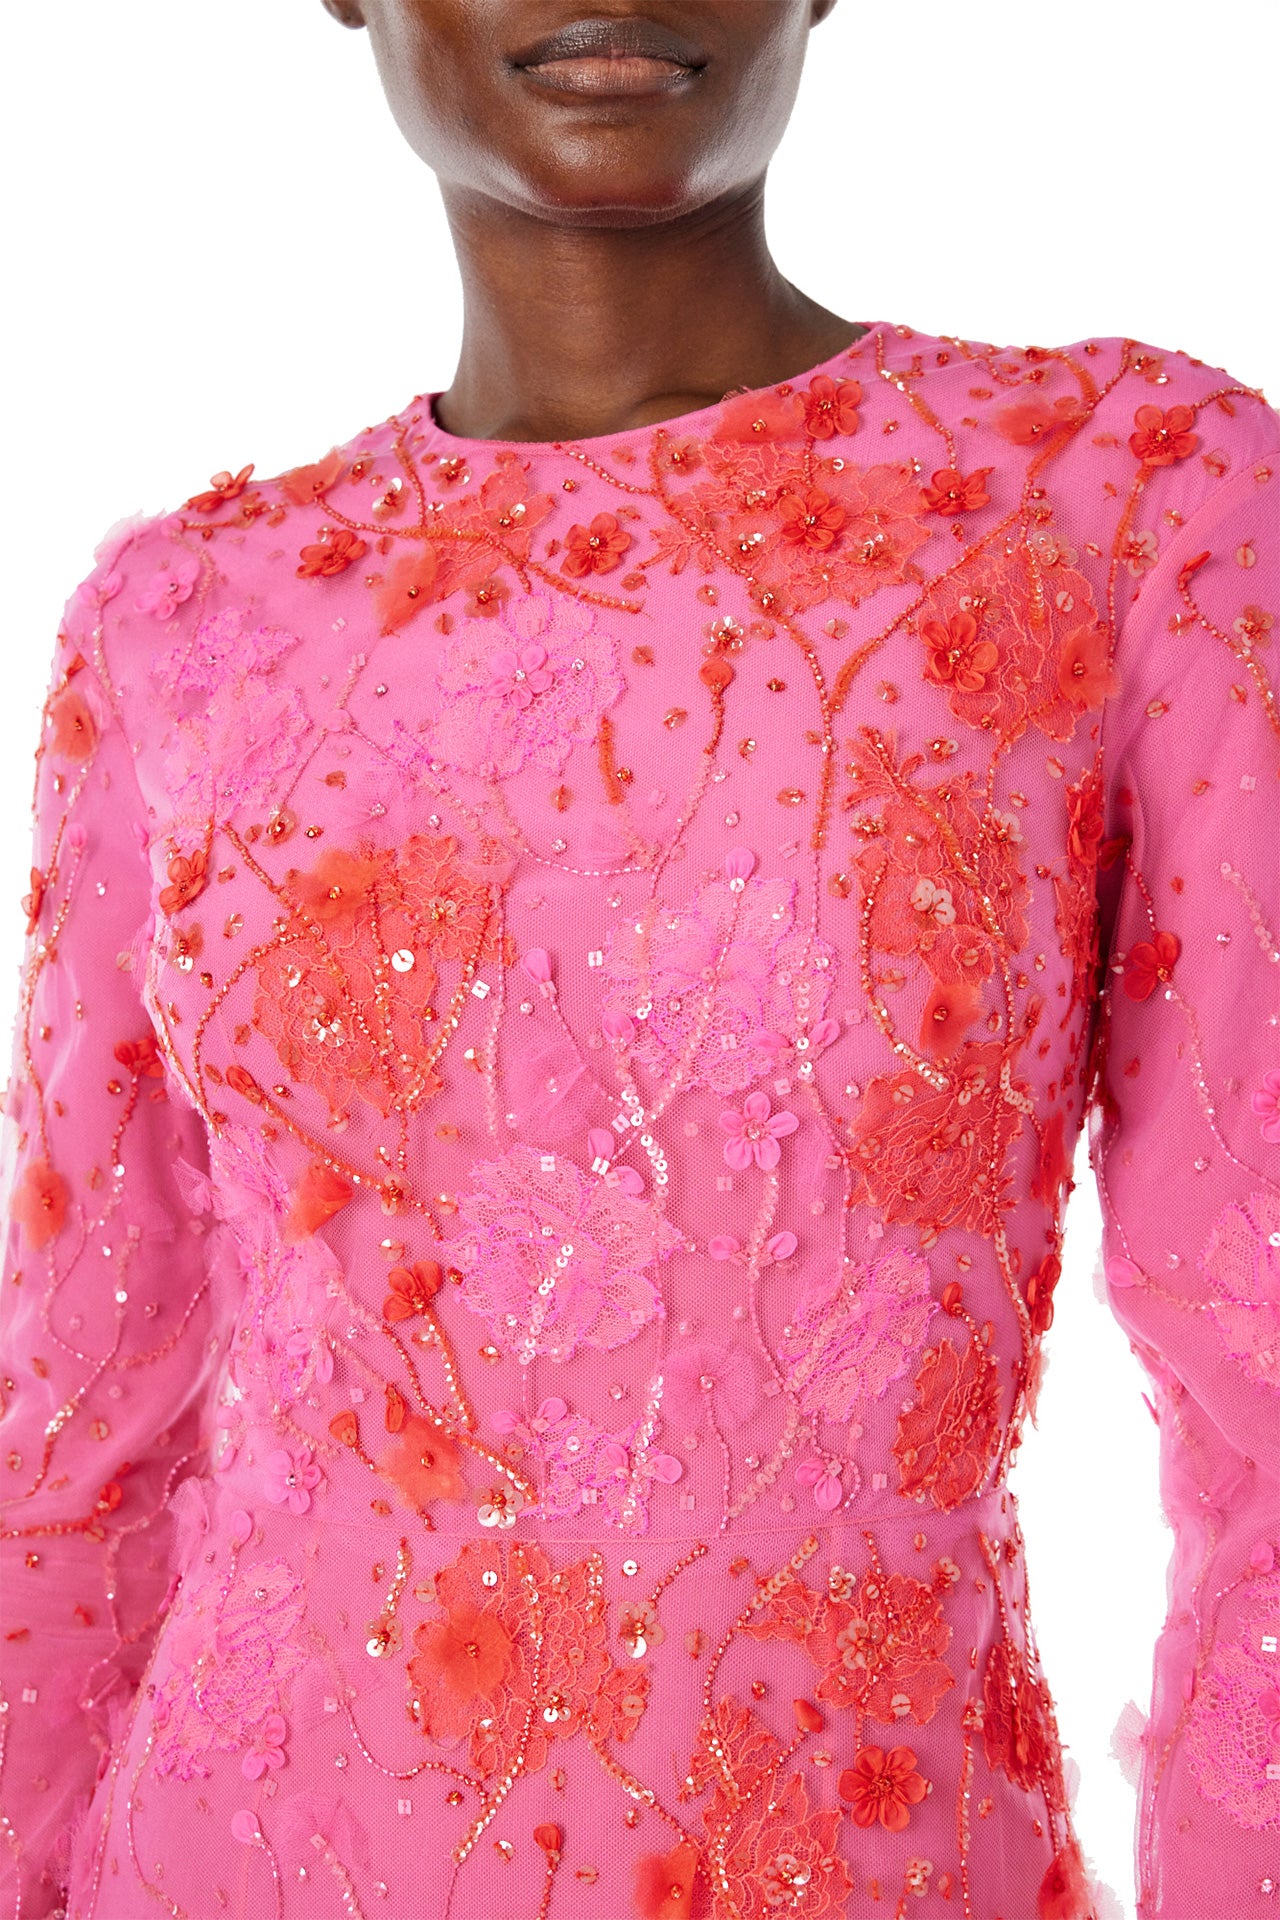 Monique Lhuillier Spring 2024 long sleeve gown in raspberry red embroidery - detail.